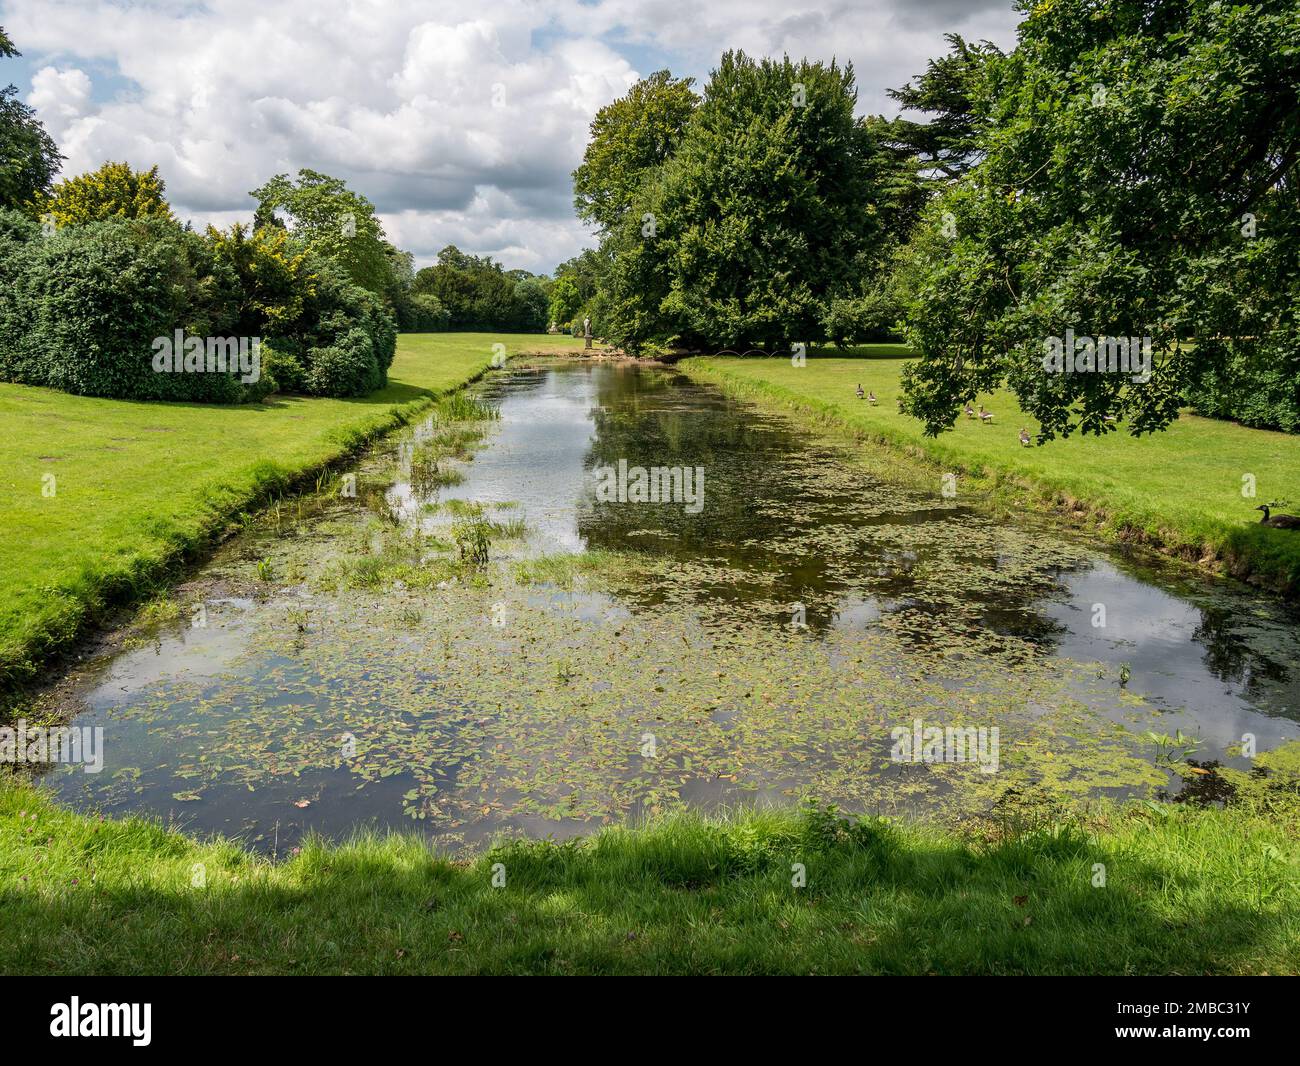 ICE Pond / Mirror Lake dans Belton House Gardens, Grantham, Lincolnshire, Angleterre Royaume-Uni Banque D'Images